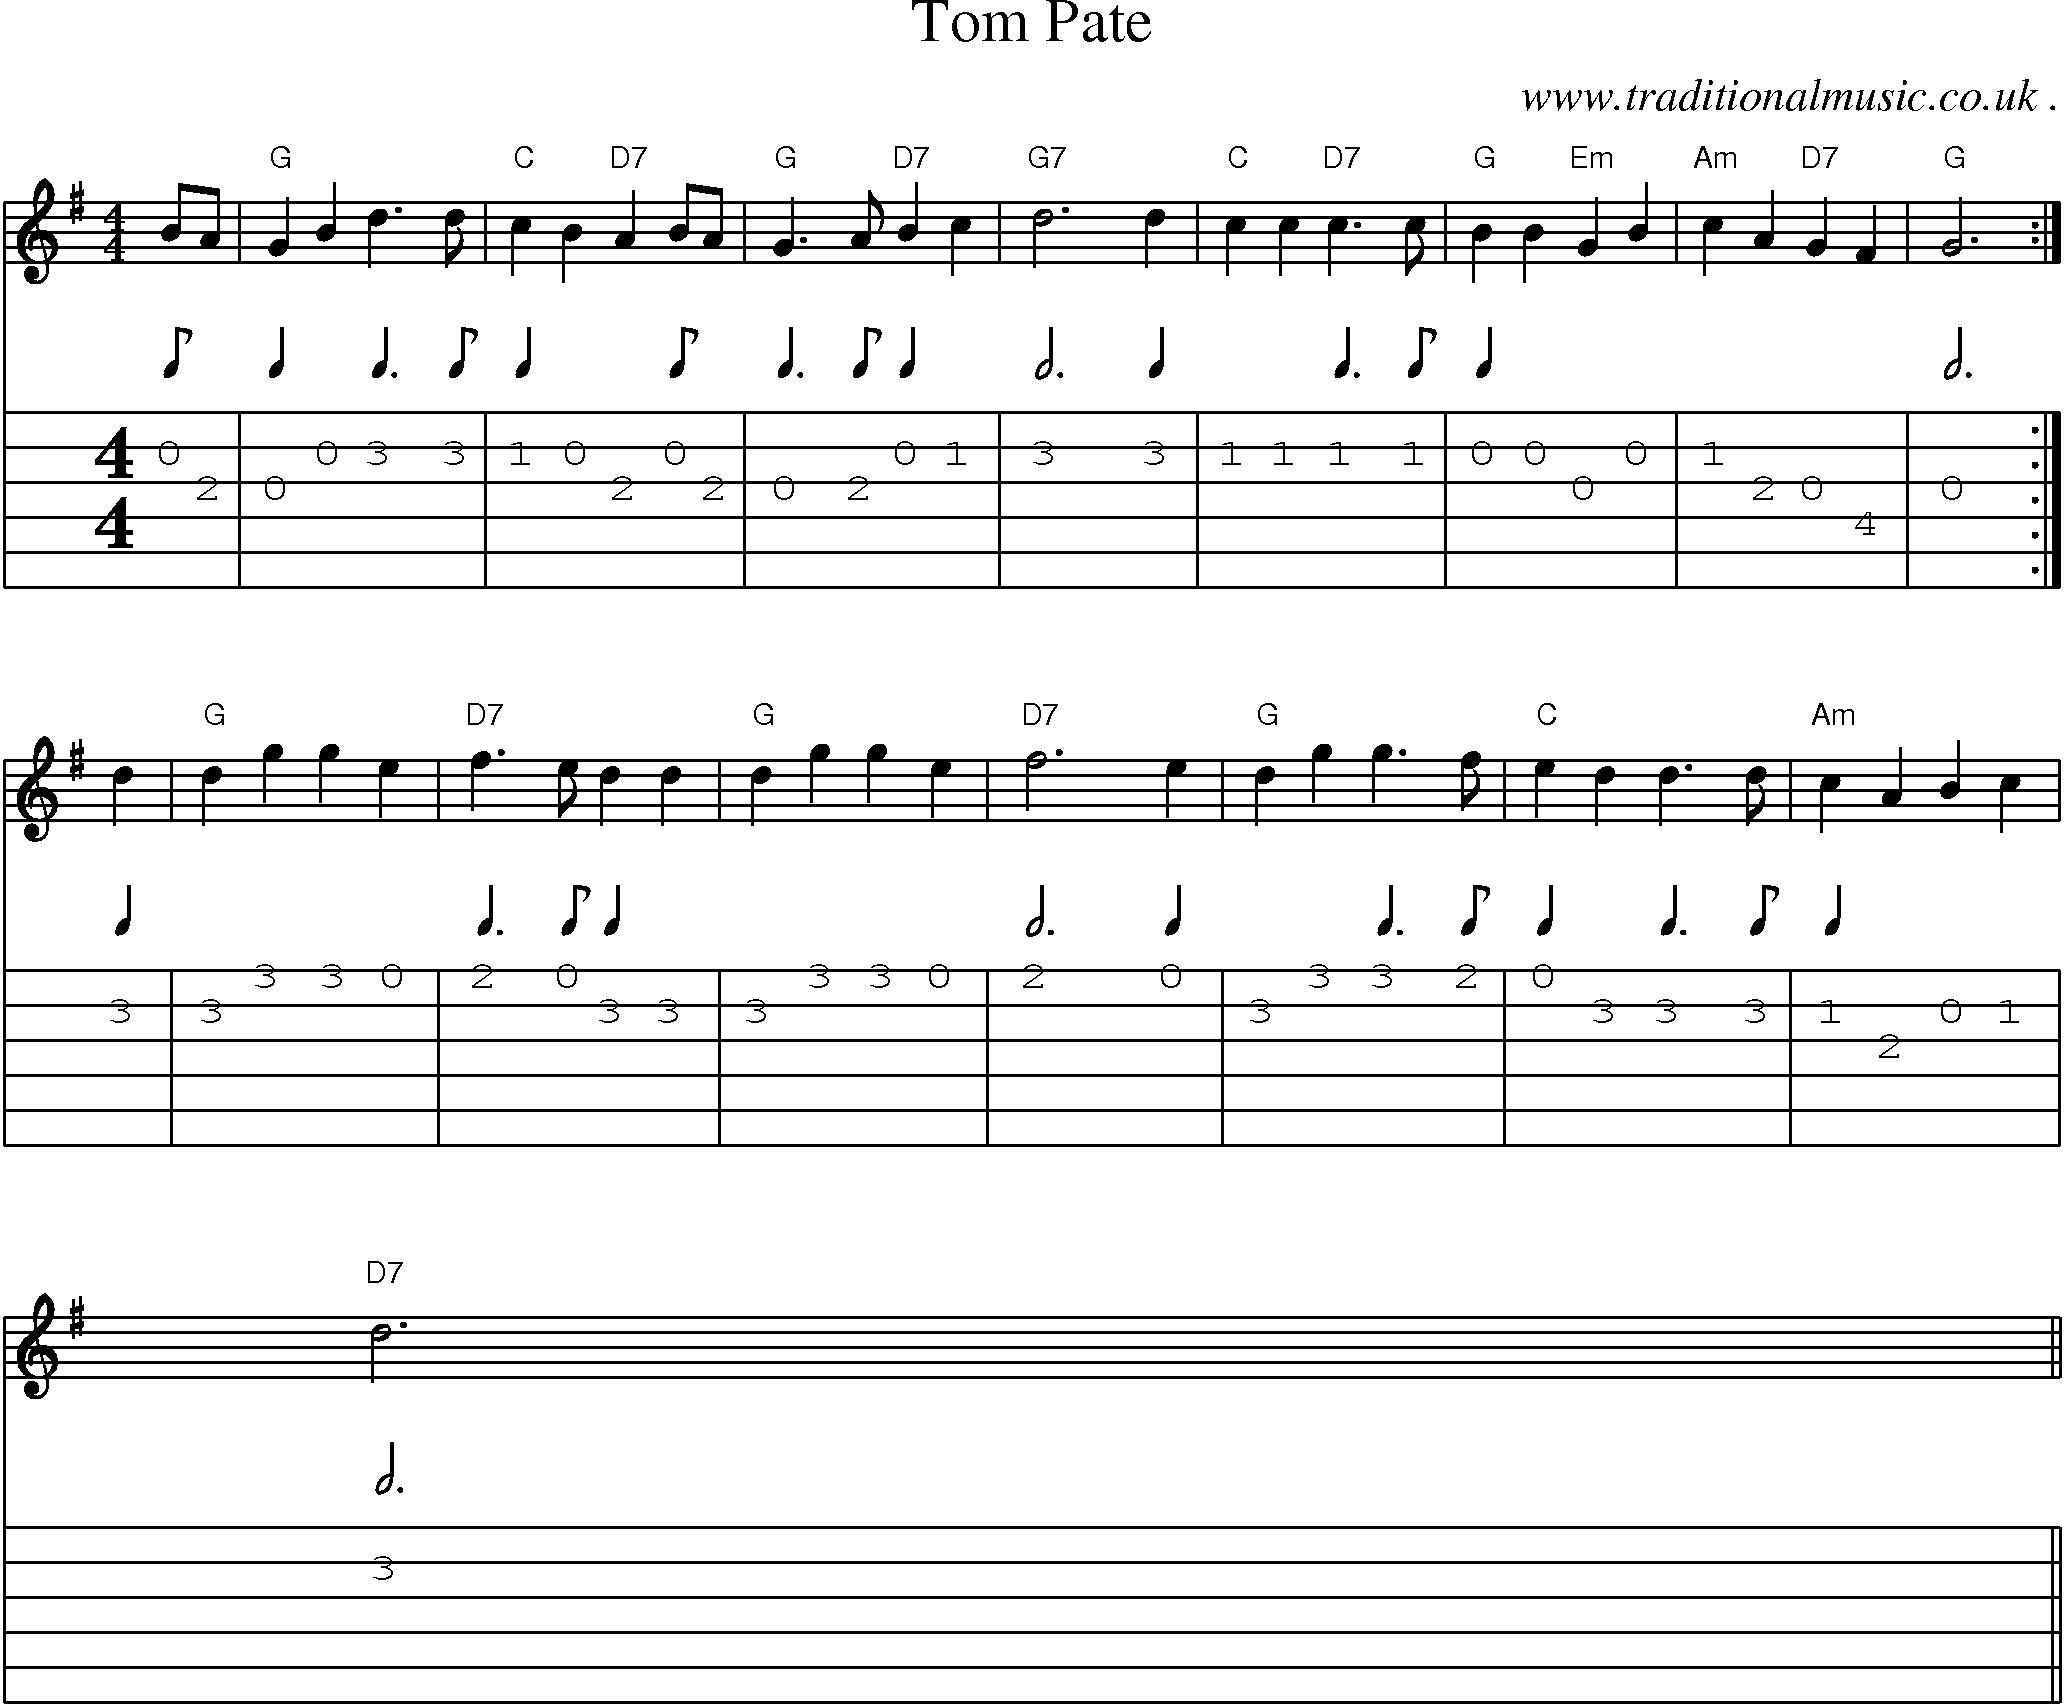 Sheet-Music and Guitar Tabs for Tom Pate